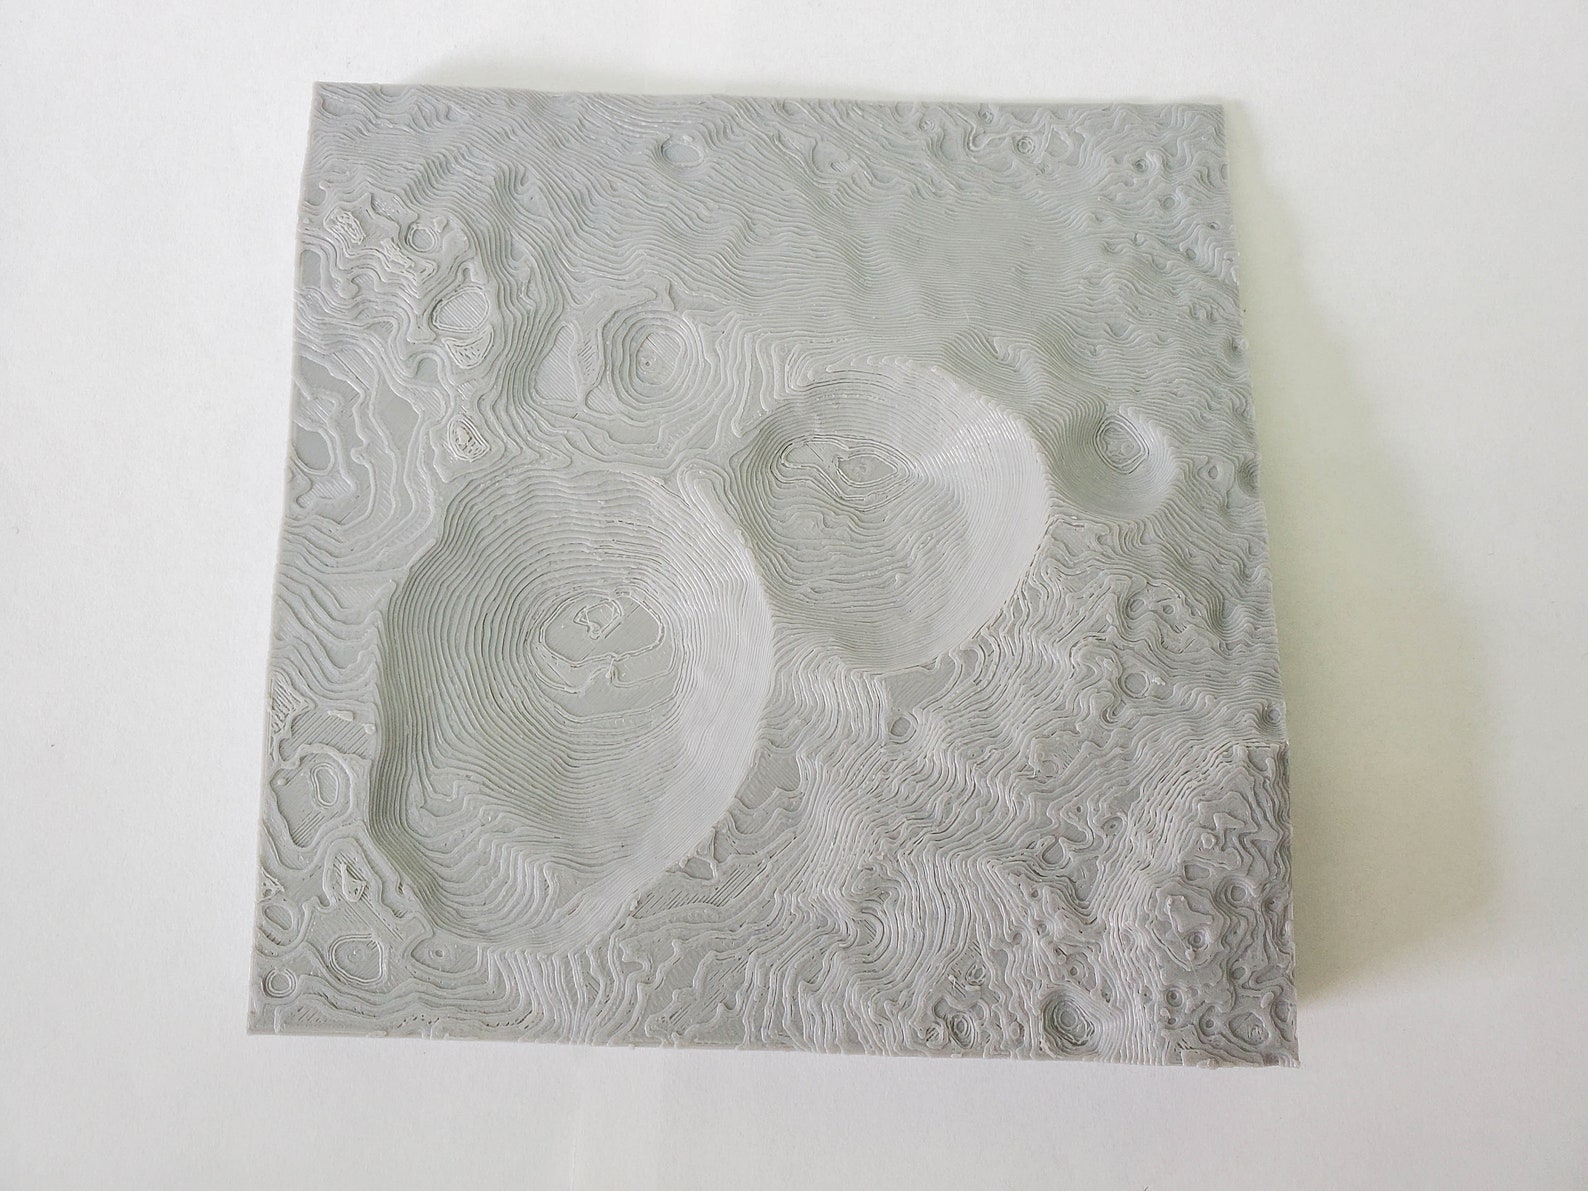 NASA 3D Topography model of SNOWMAN CRATER on the asteroid | Etsy